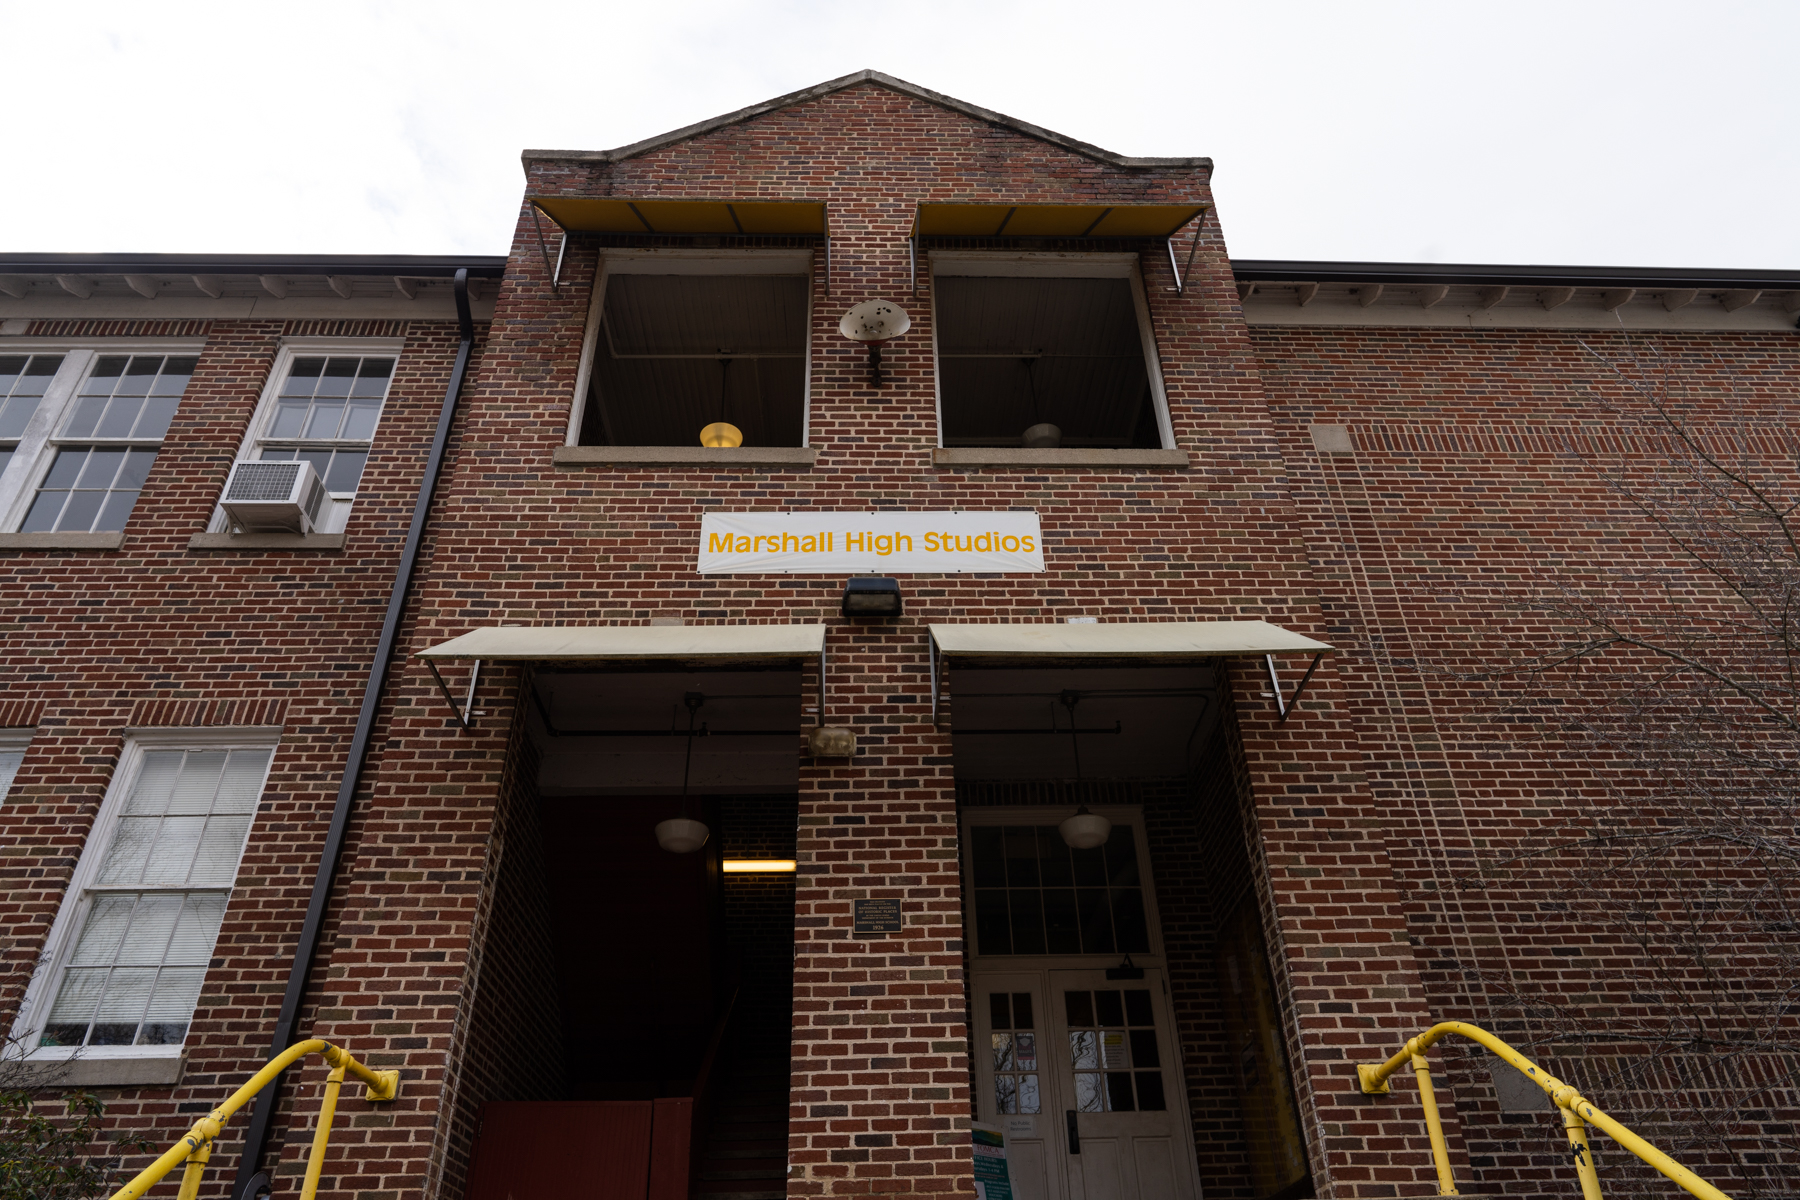 a photo of the exterior of Marshall High Studios. The building is two stories tall and made of brick. A yellow handrail goes up to the building and a white sign with yellow letters says Marshall High Studios.